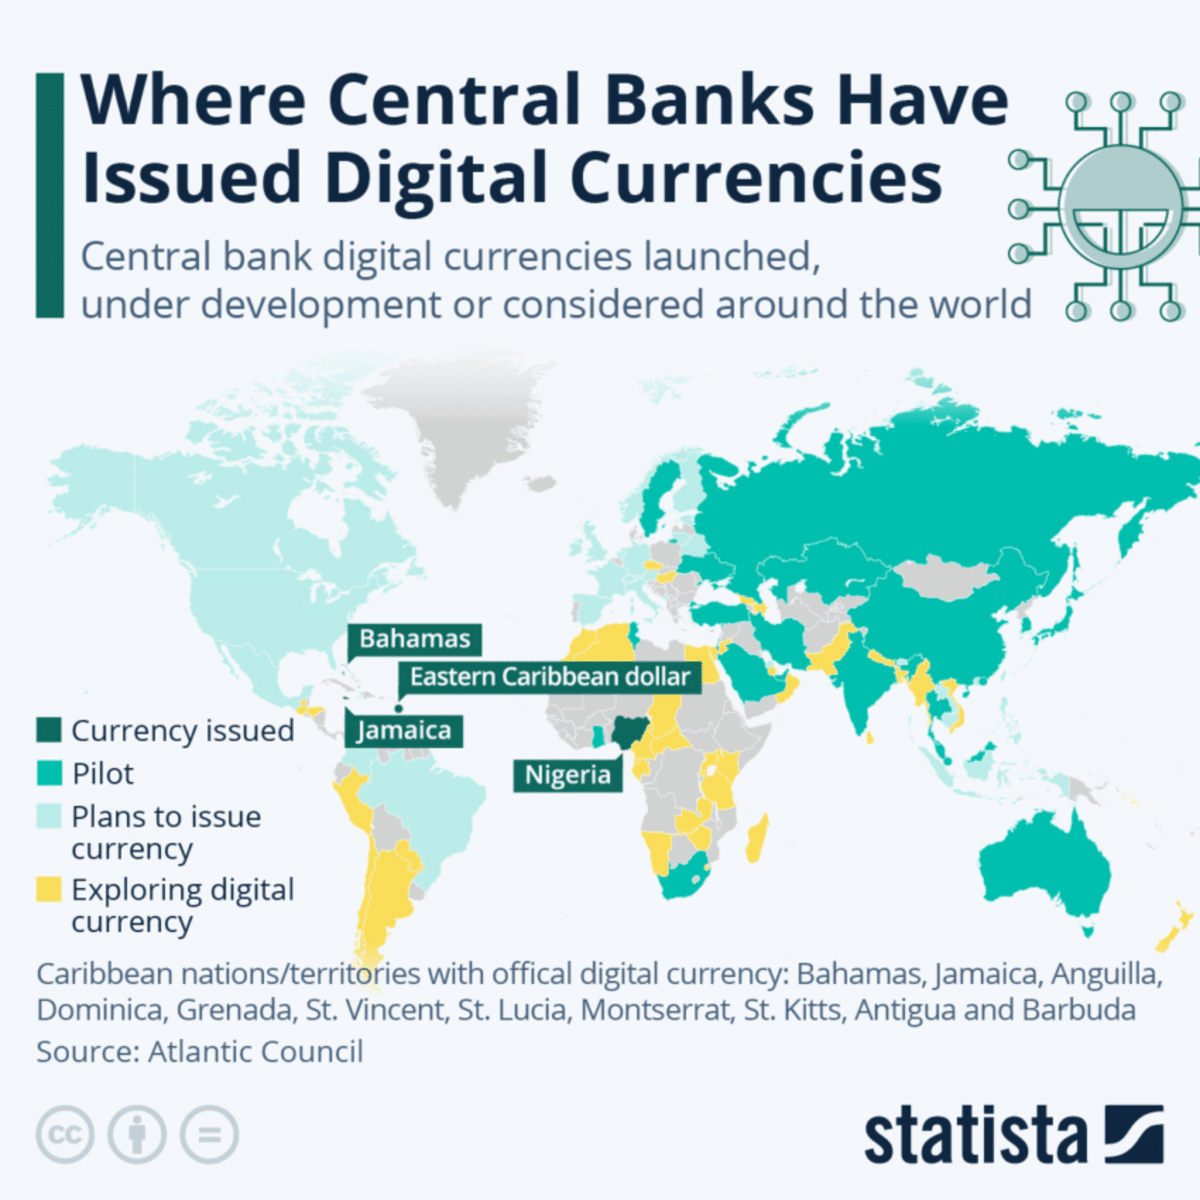 CBDC adoption is growing globally, but the digital dollar is not imminent